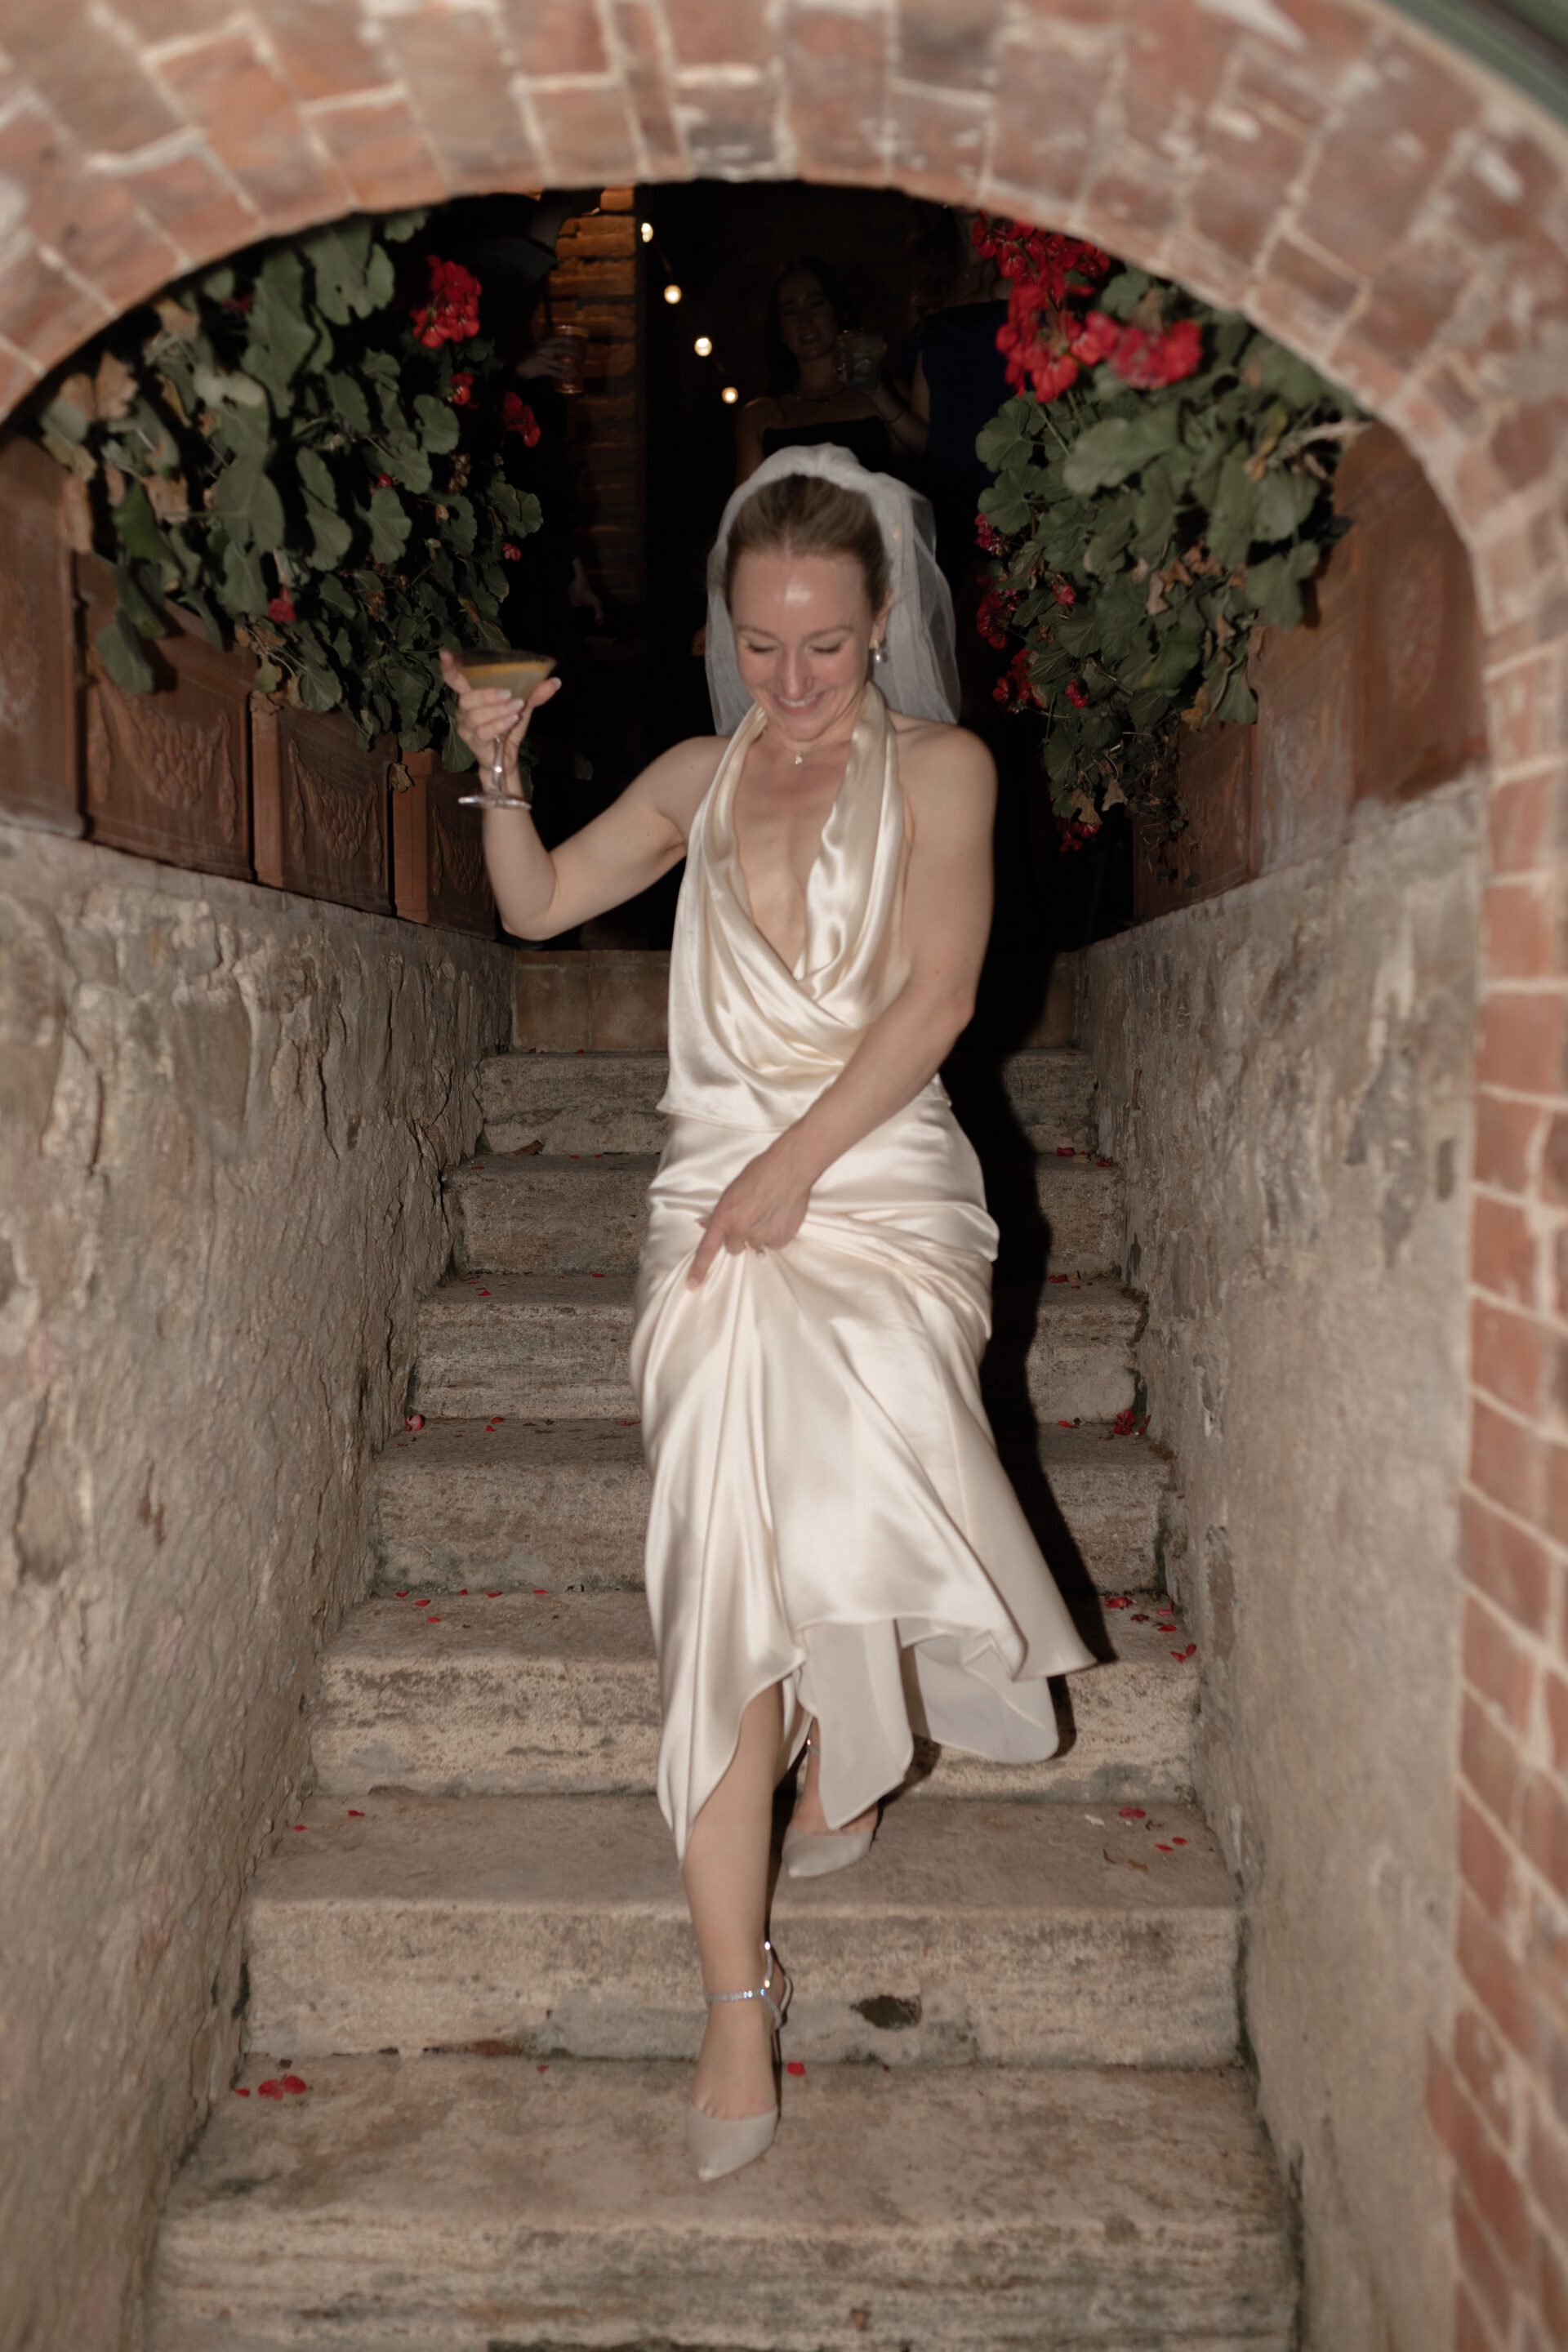 The bride changes outfits for her luxury Italian wedding afterparty